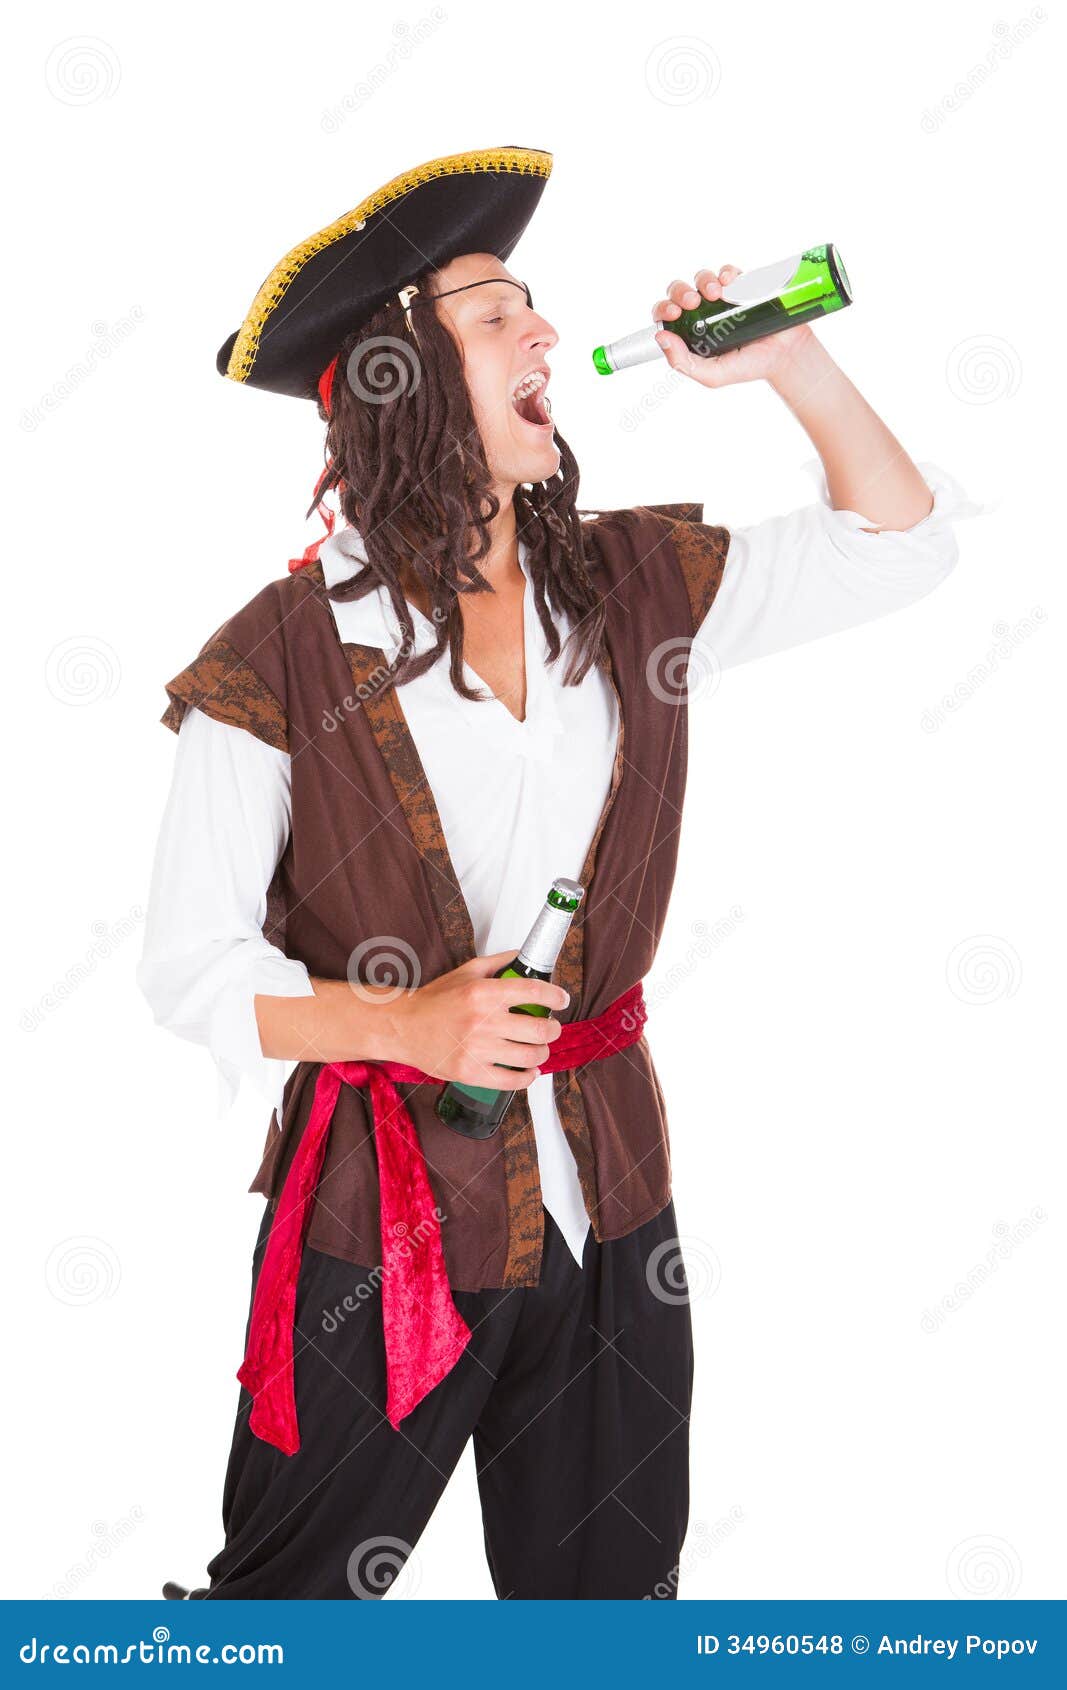 Pirate Drinking Beer Royalty Free Stock Photos - Image: 34960548